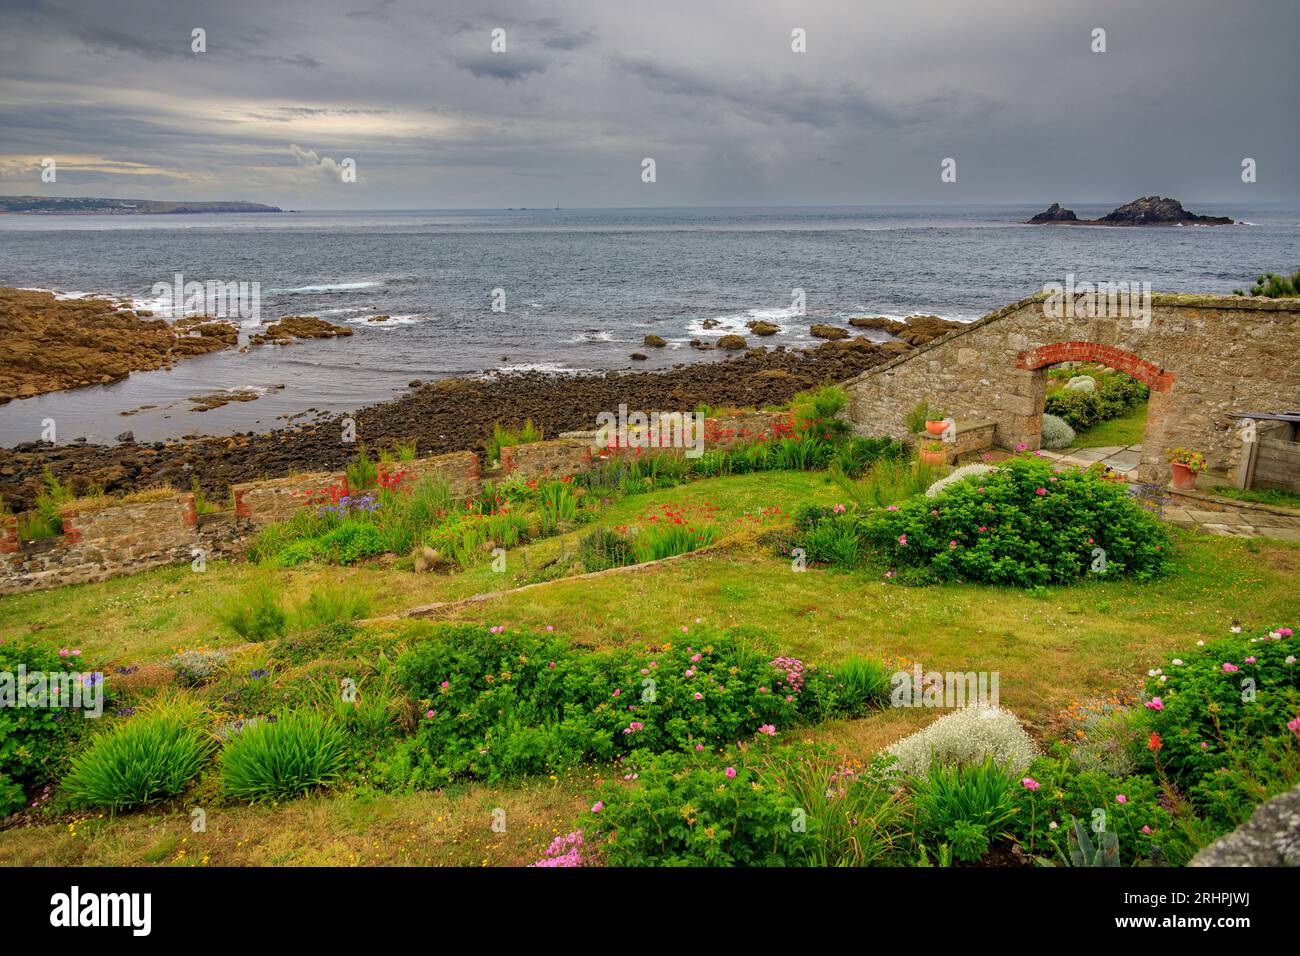 A walled garden with stunning views of the Brisons Reef under dark and dramatic skies at Cape Cornwall, nr Land's End, Cornwall, England, UK Stock Photo